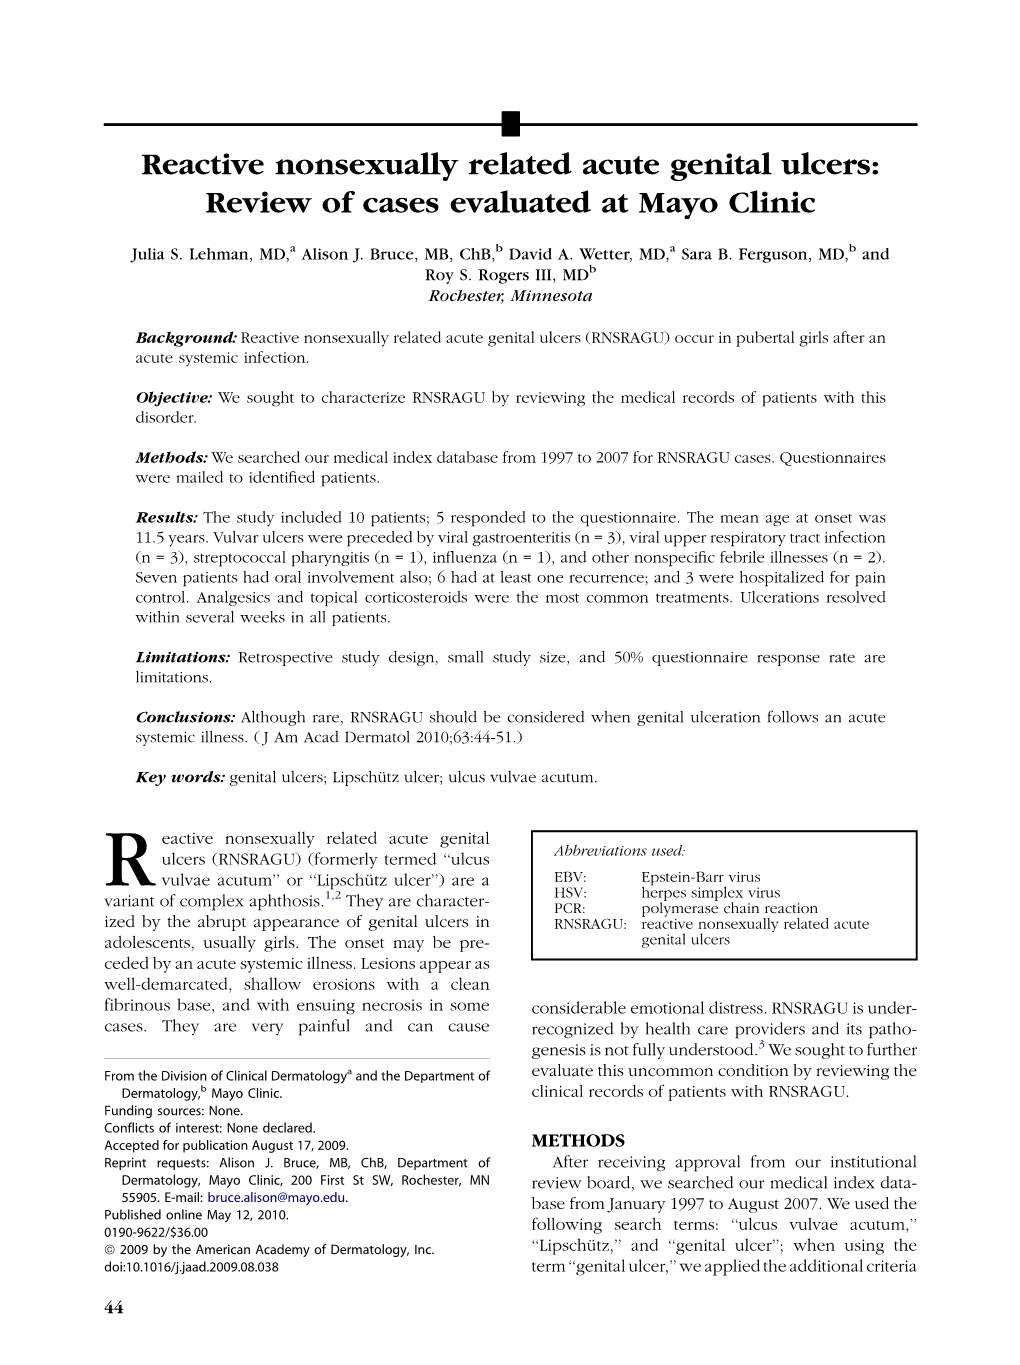 Reactive Nonsexually Related Acute Genital Ulcers: Review of Cases Evaluated at Mayo Clinic